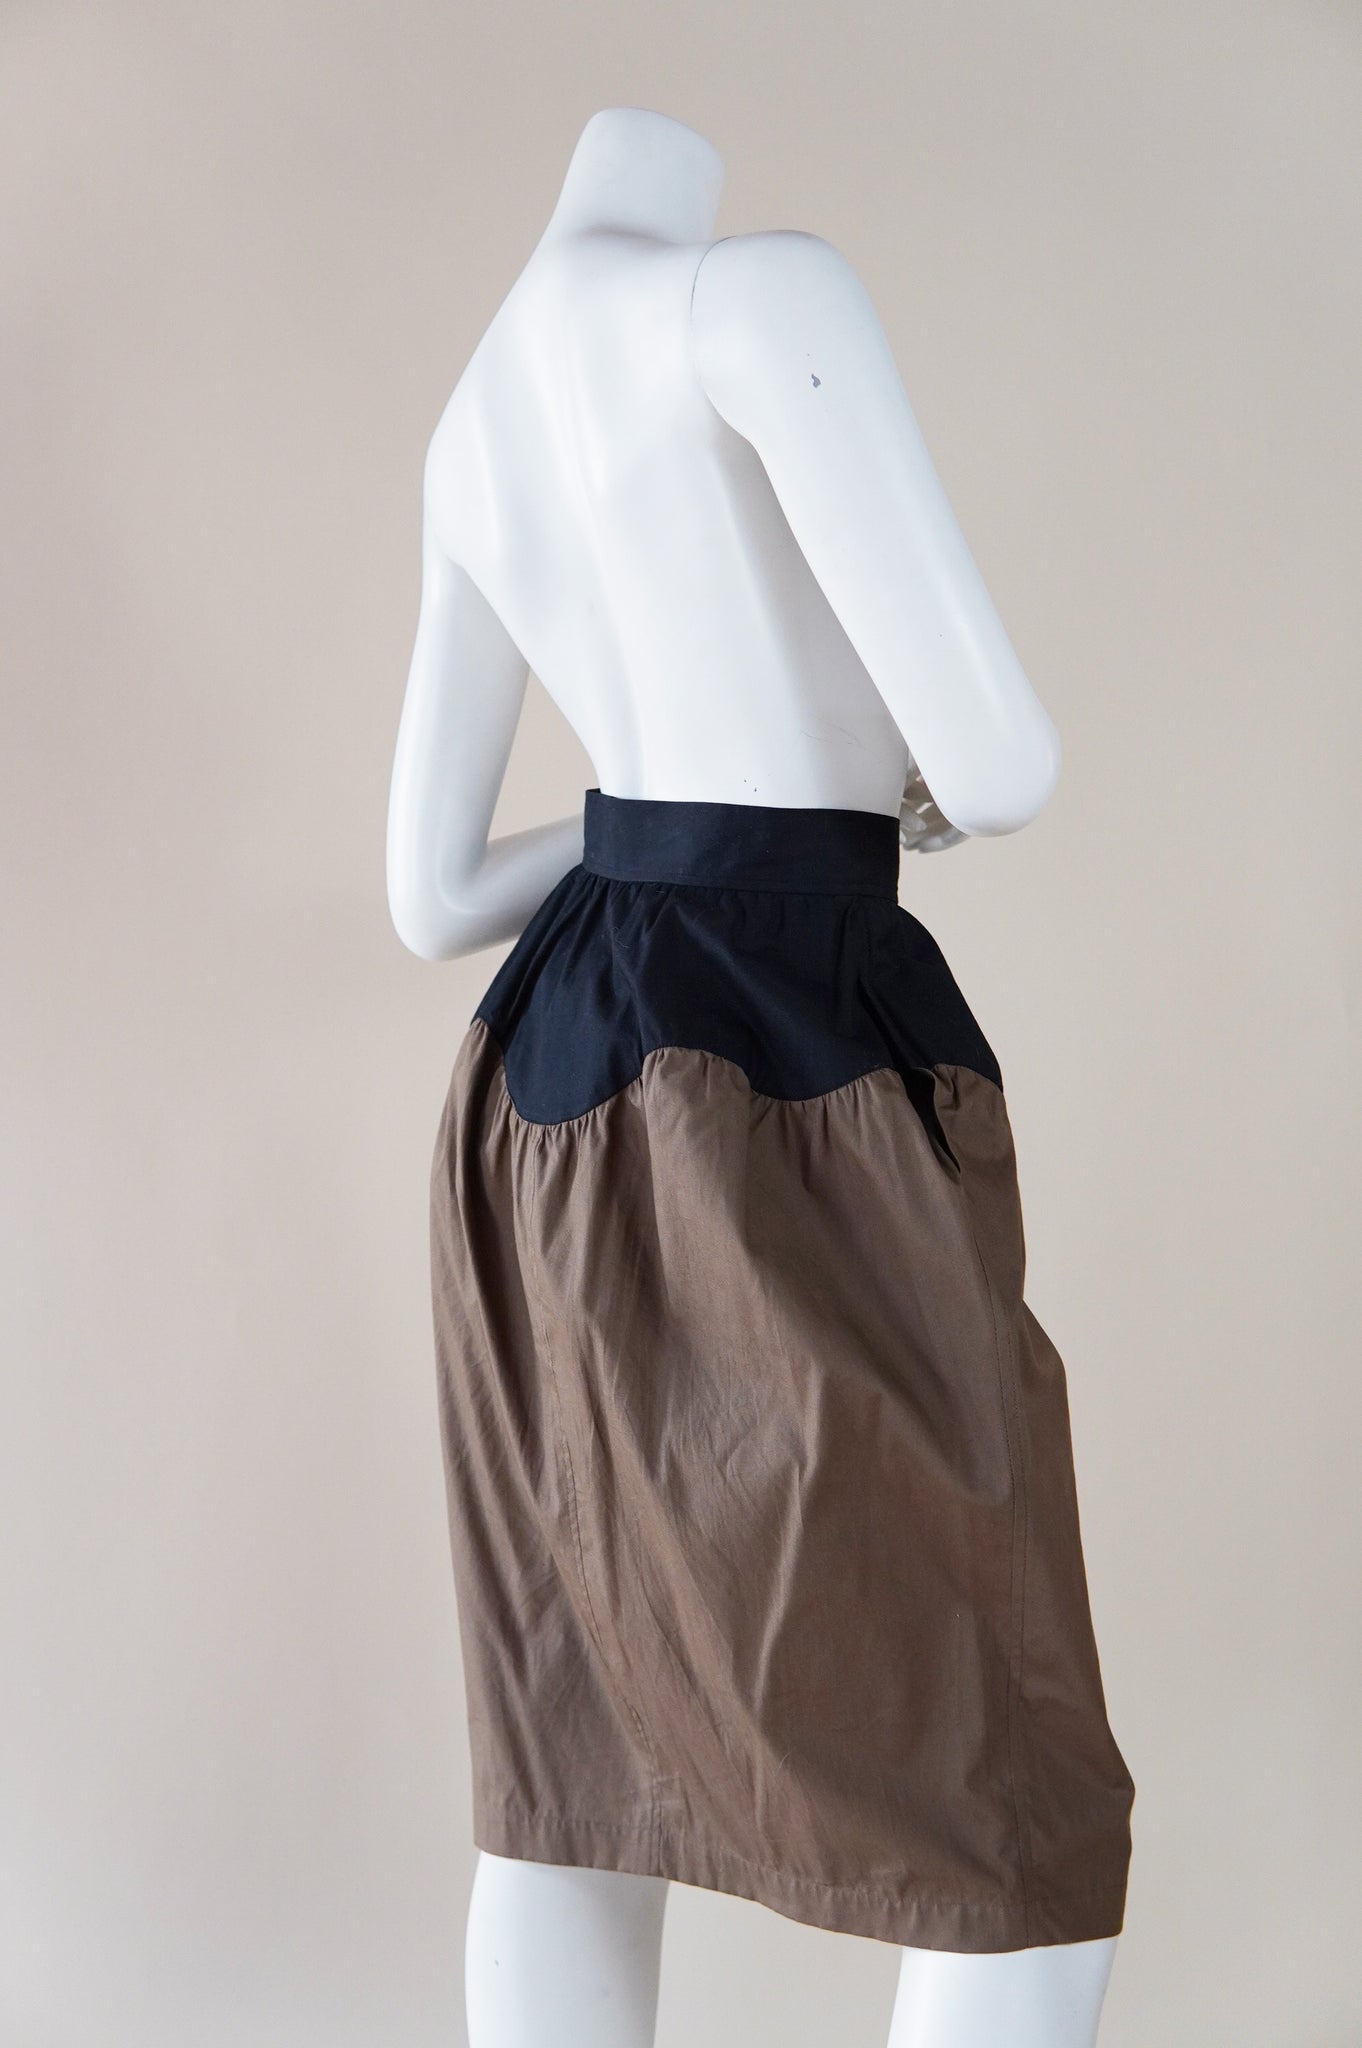 Spring Summer 1980 Yves Saint Laurent Rive Gauche balloon two-tone skirt with scalloped edge side